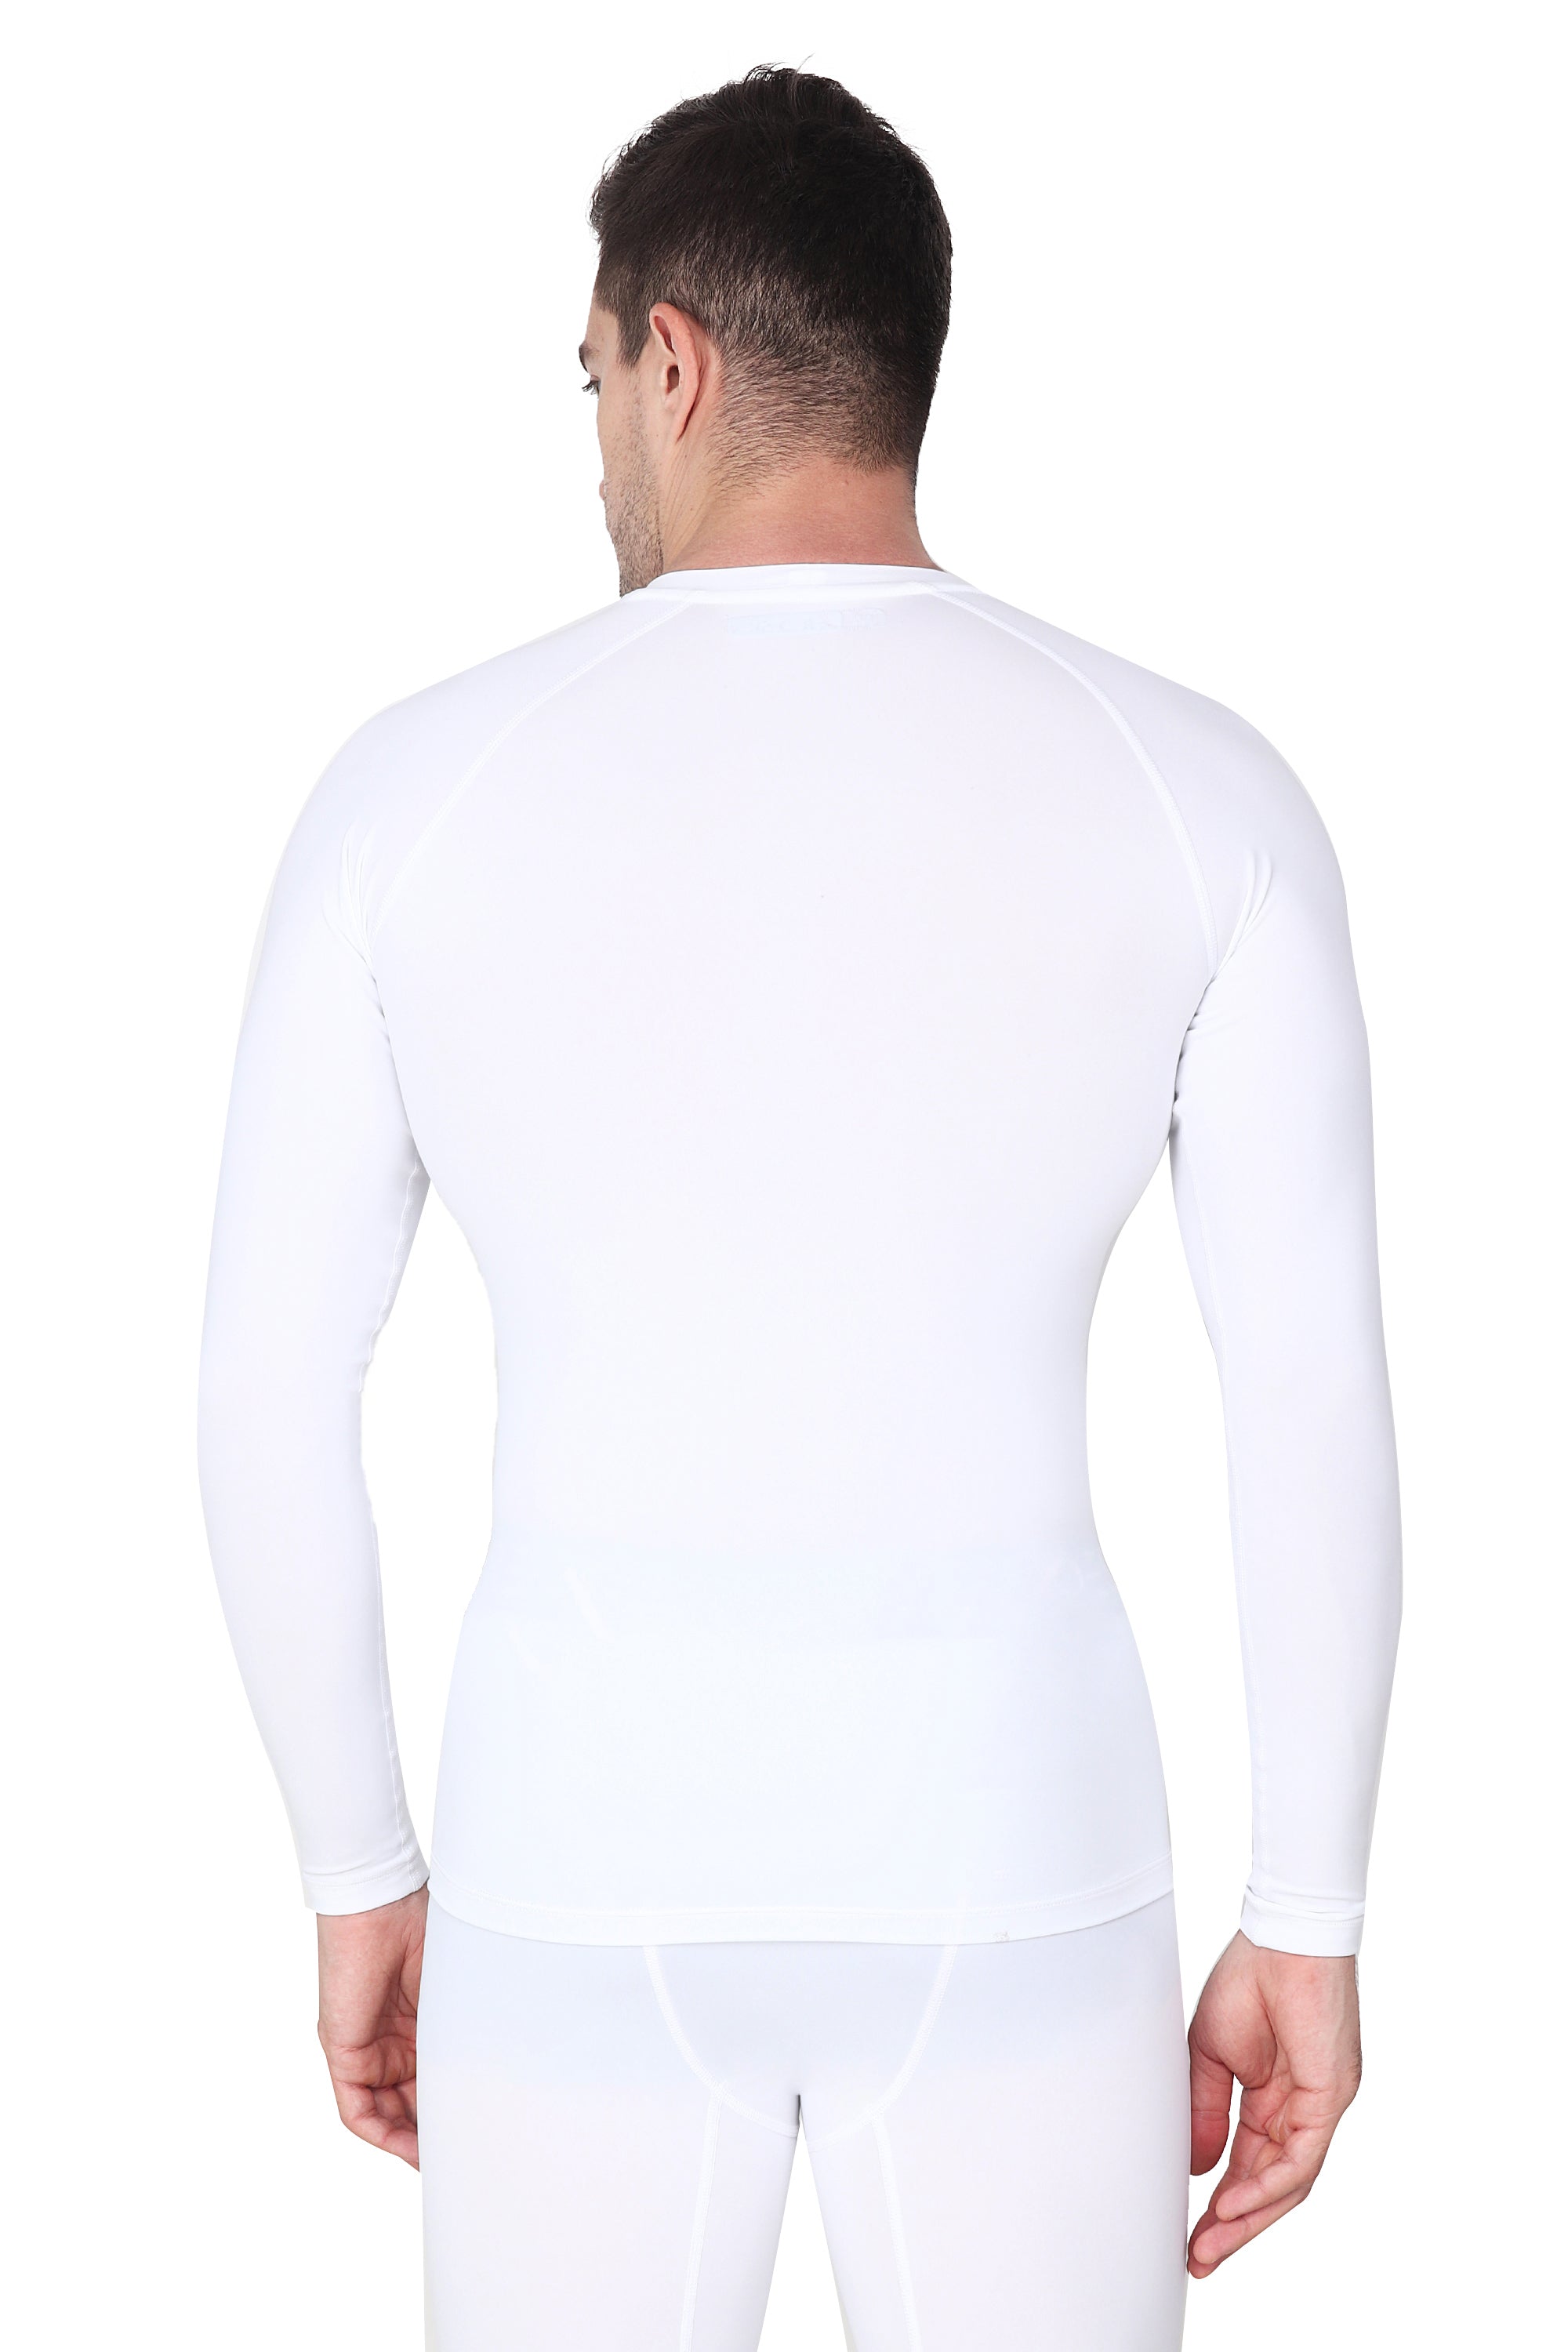 Nylon Compression Tshirt Full Sleeve Tights For Men (White) – ReDesign  Sports